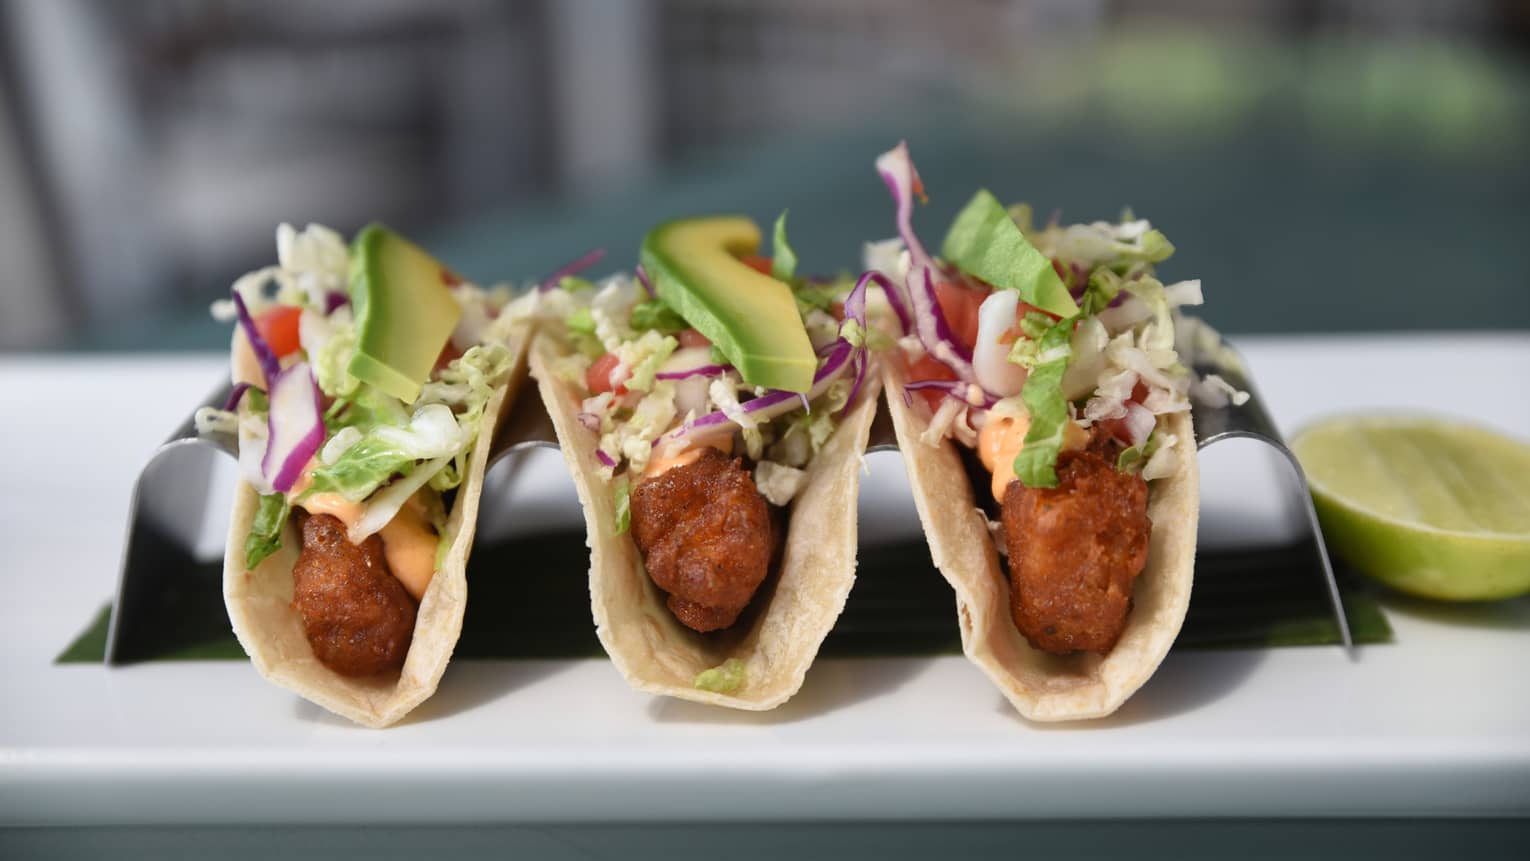 Three crispy tacos in silver stand with fried catch-of-the-day fish, red cabbage, avocado slices, chipotle mayo